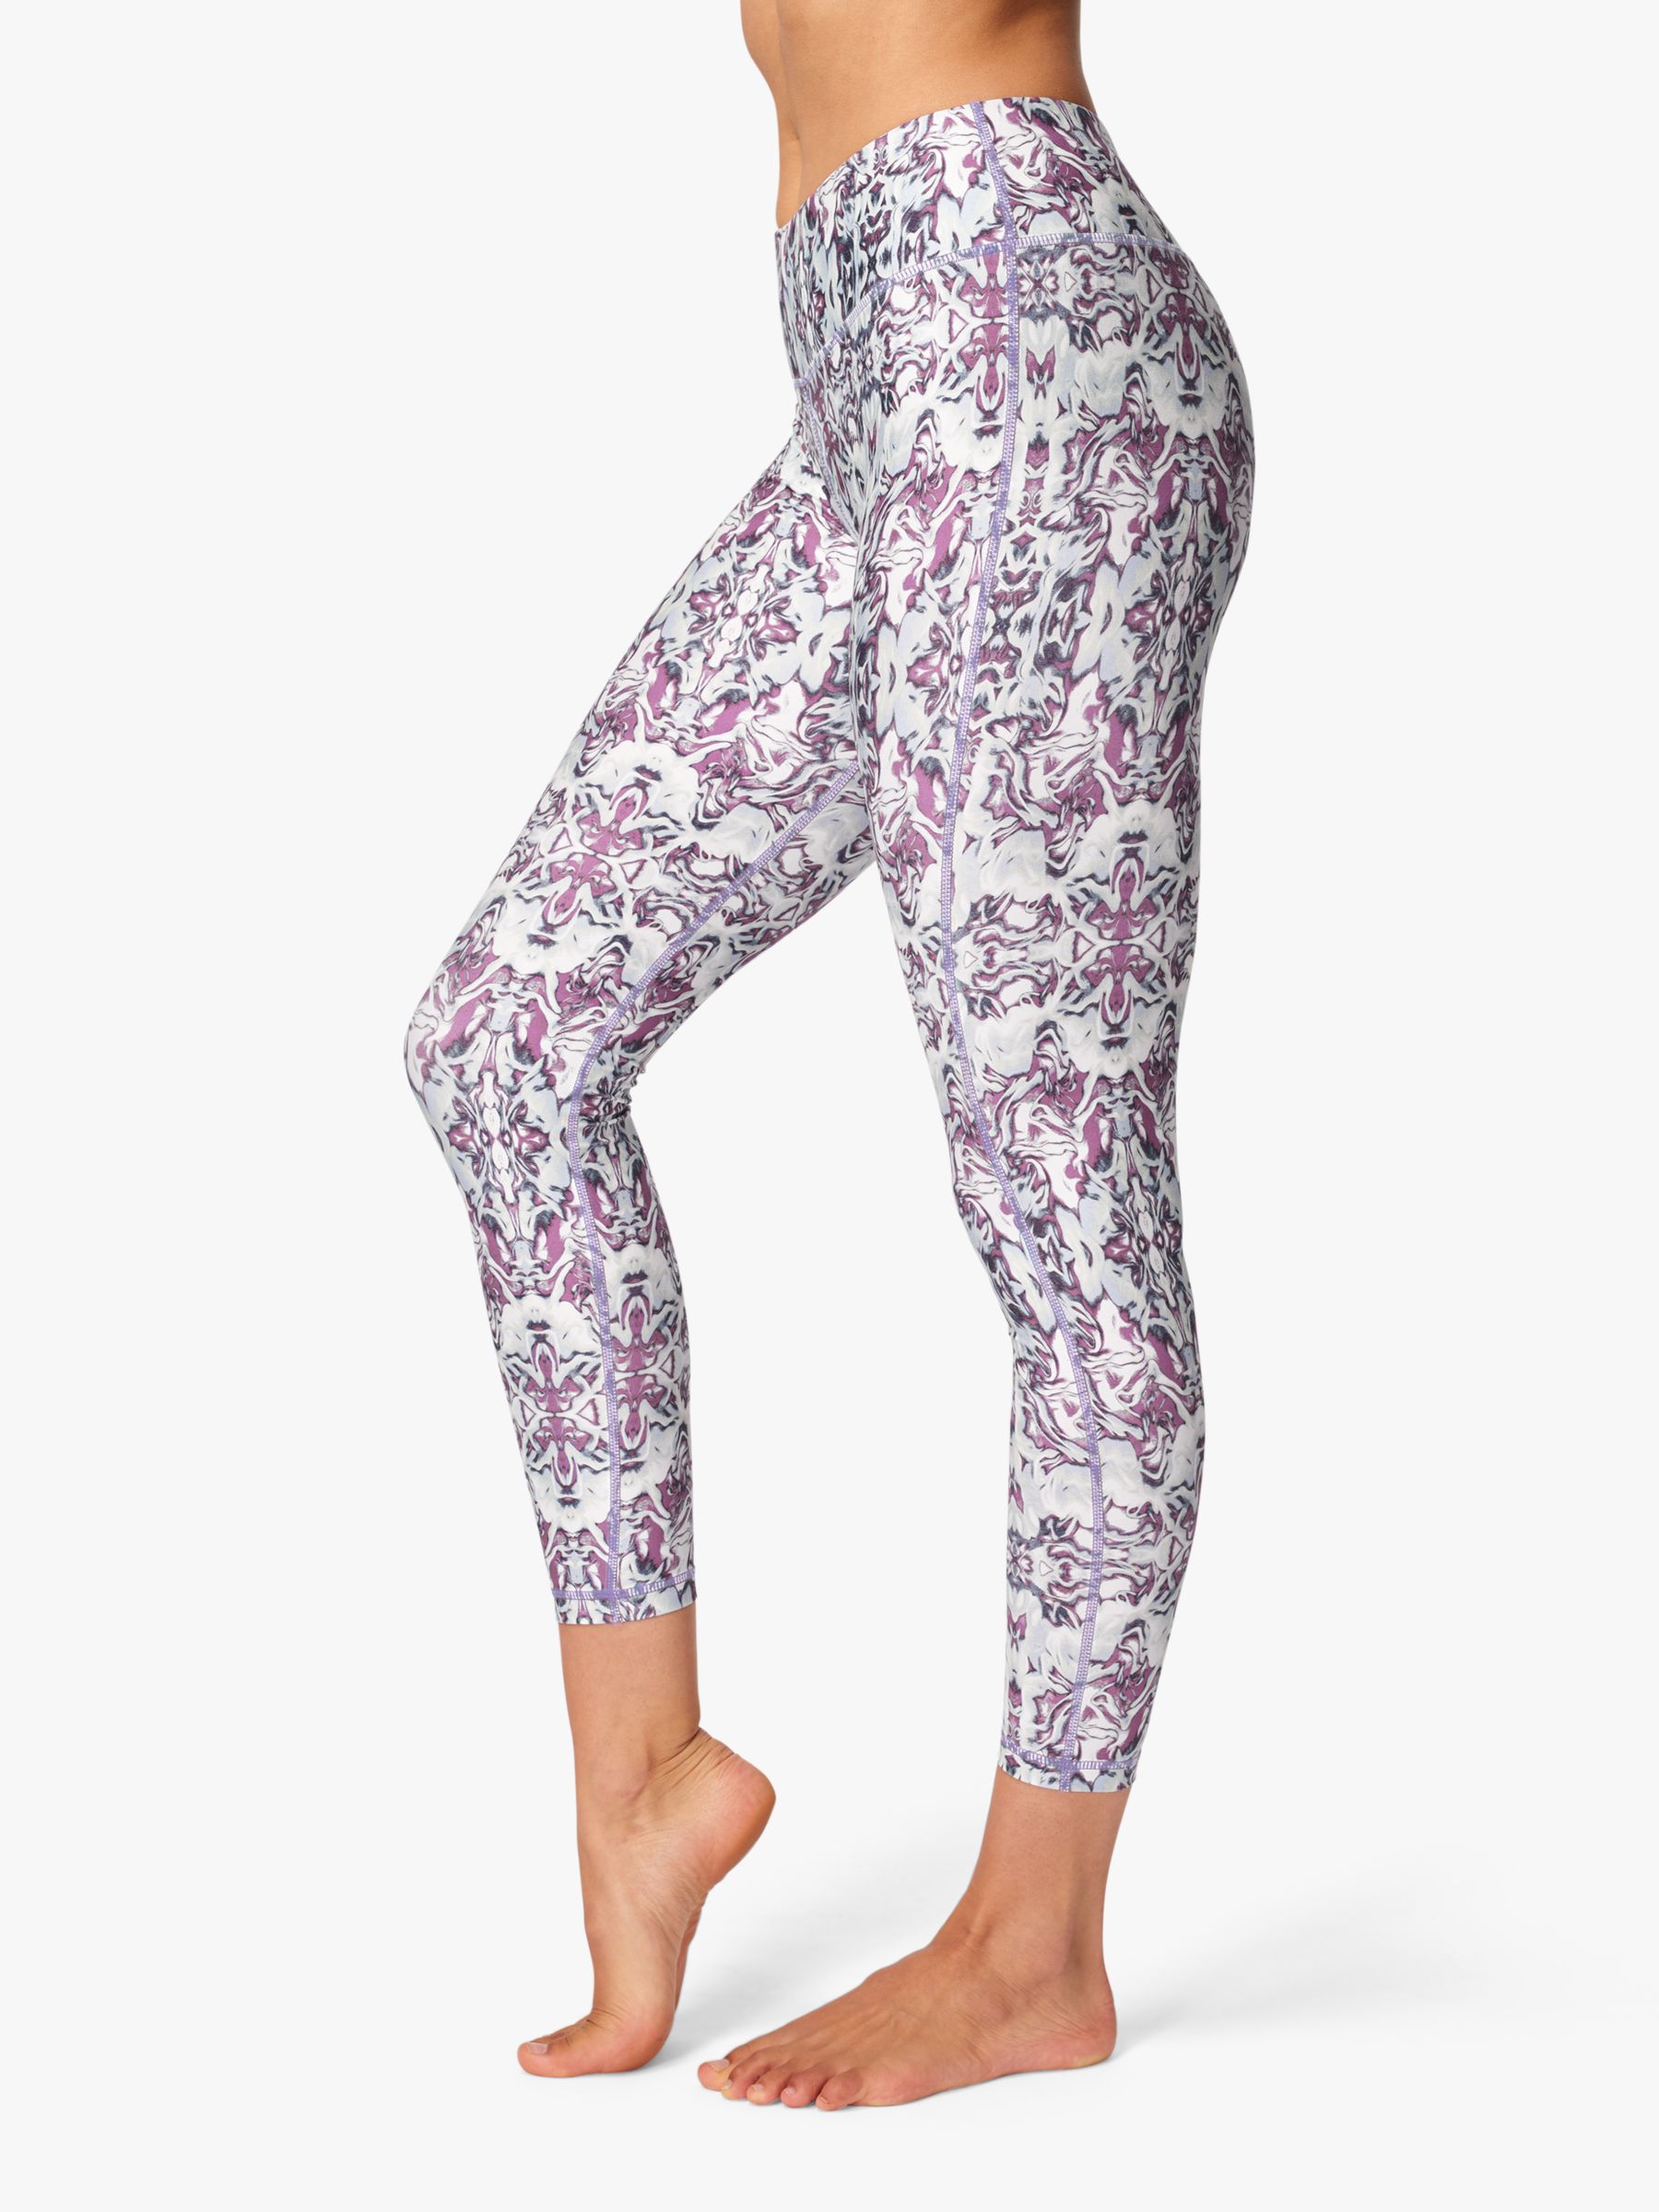 Sweaty Betty All Day Contour 7/8 Workout Leggings, Purple Dreams at ...